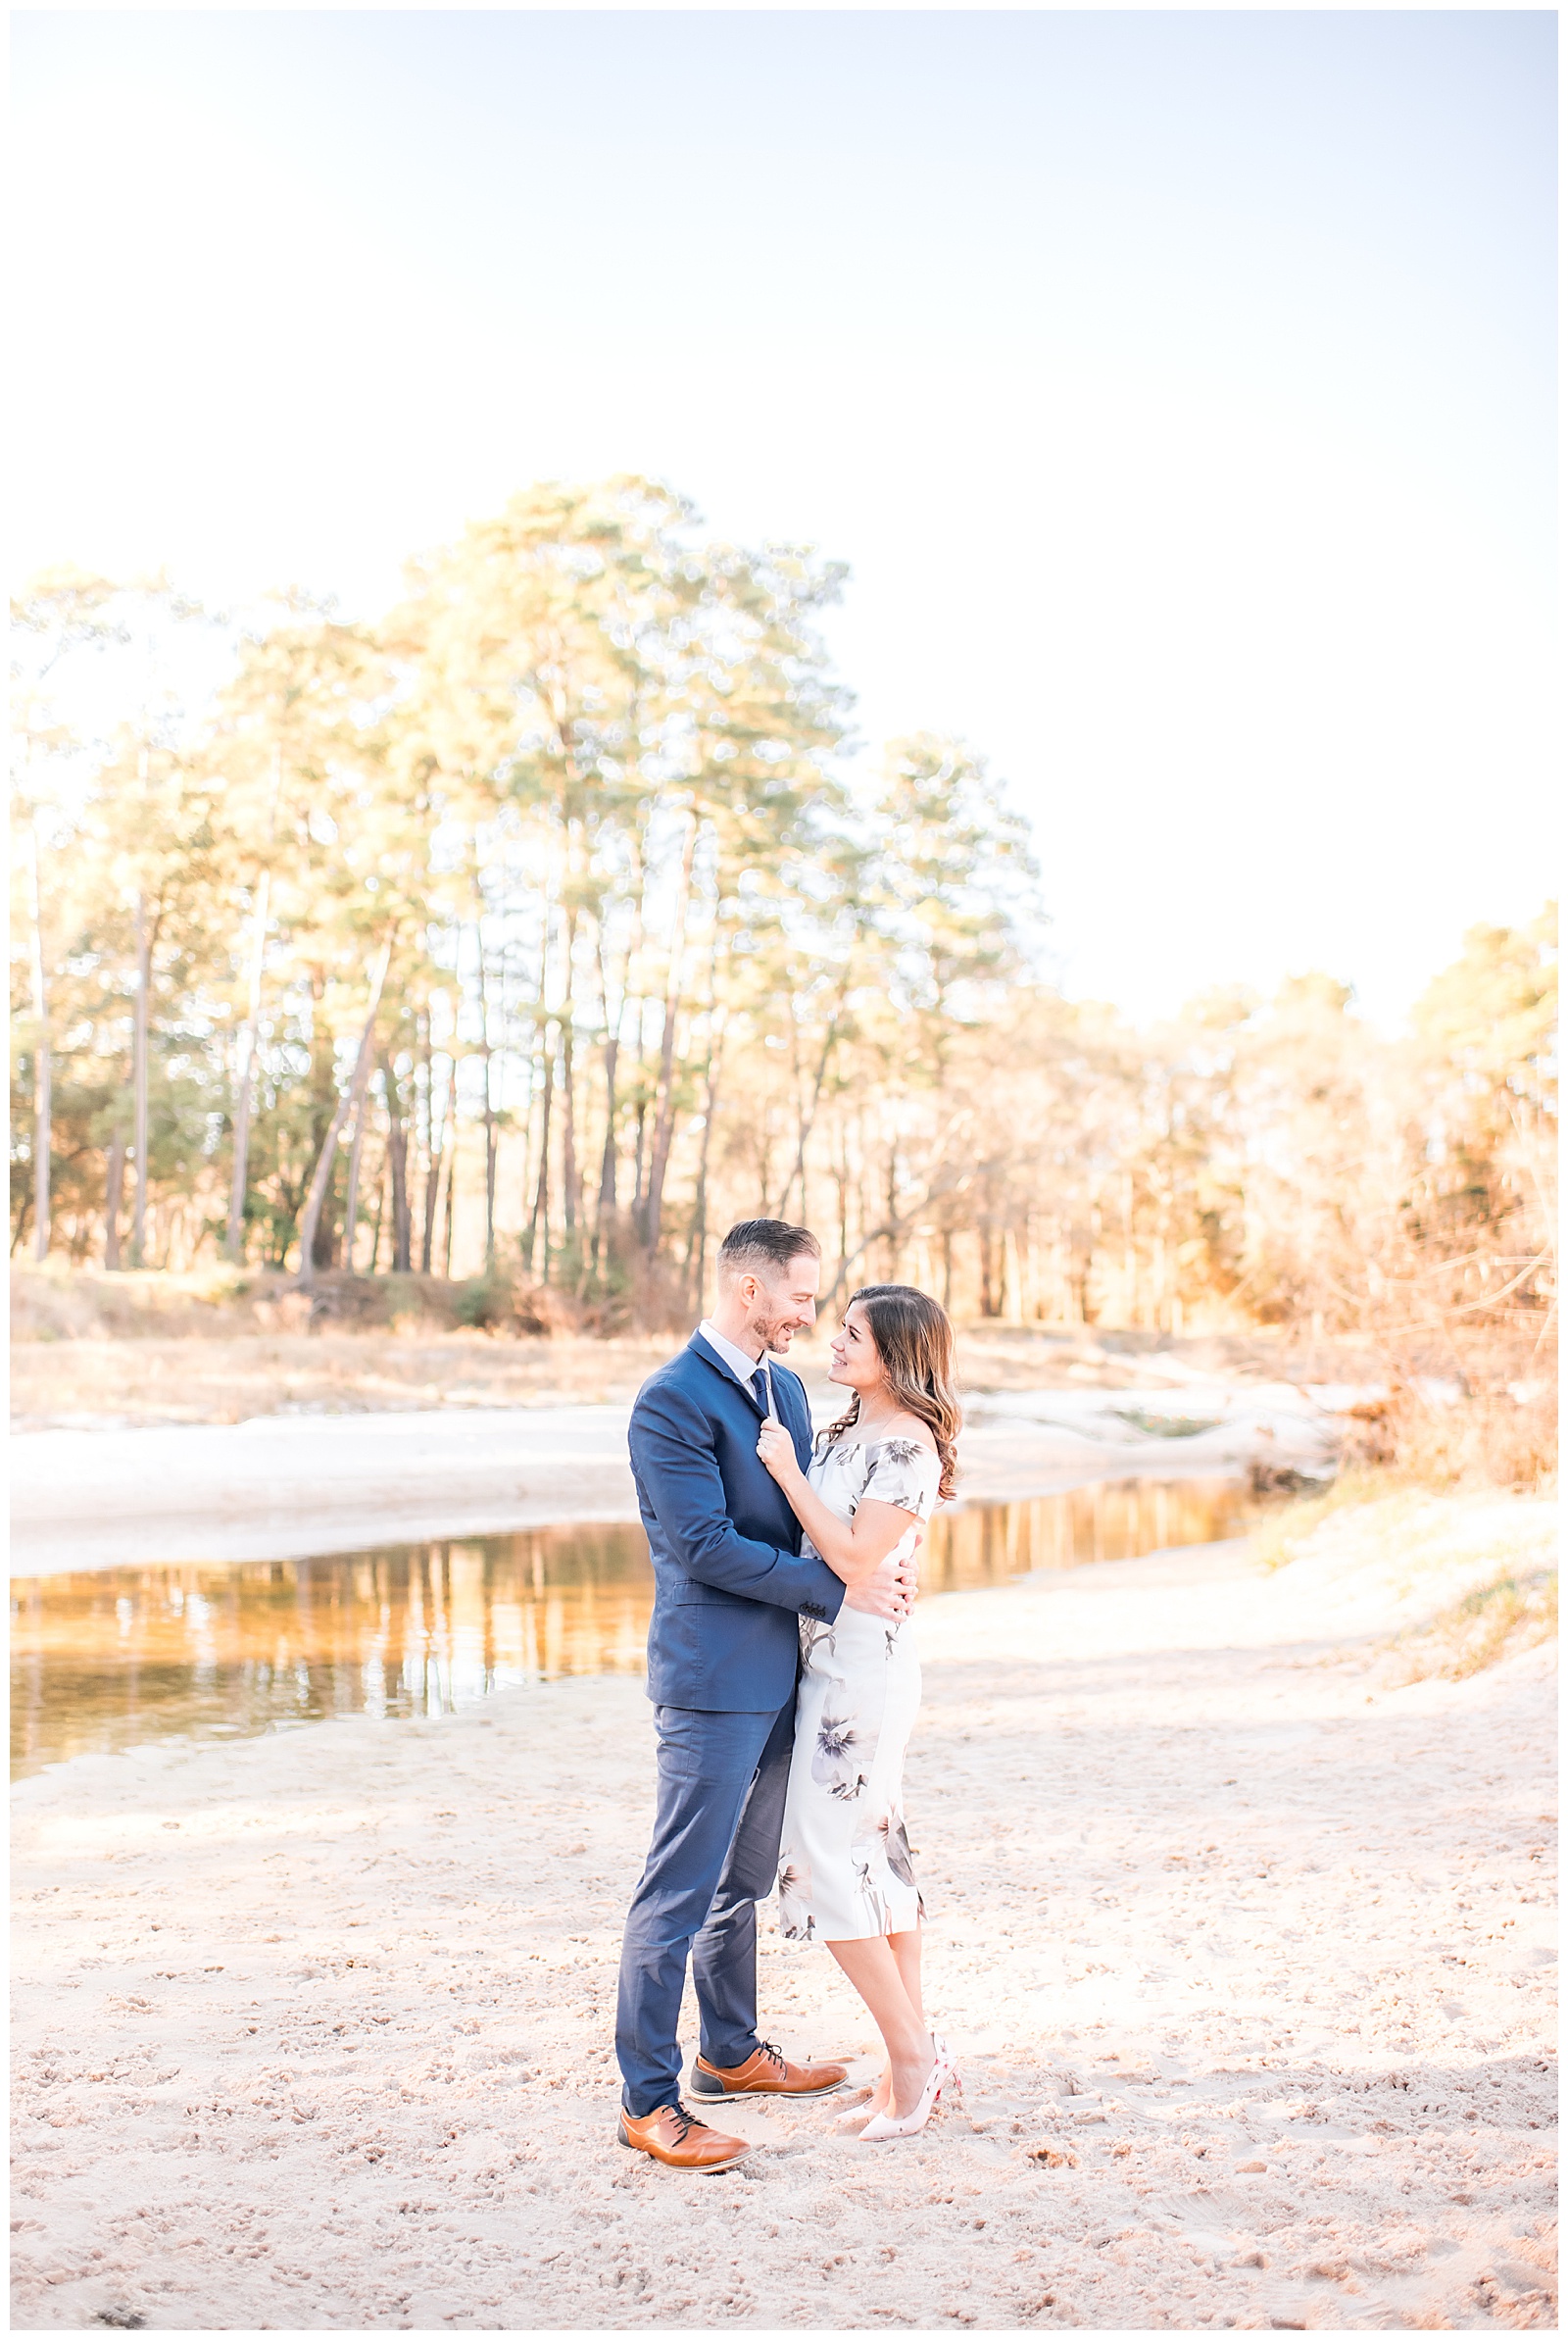 Winter Engagement Photography in Houston Texas